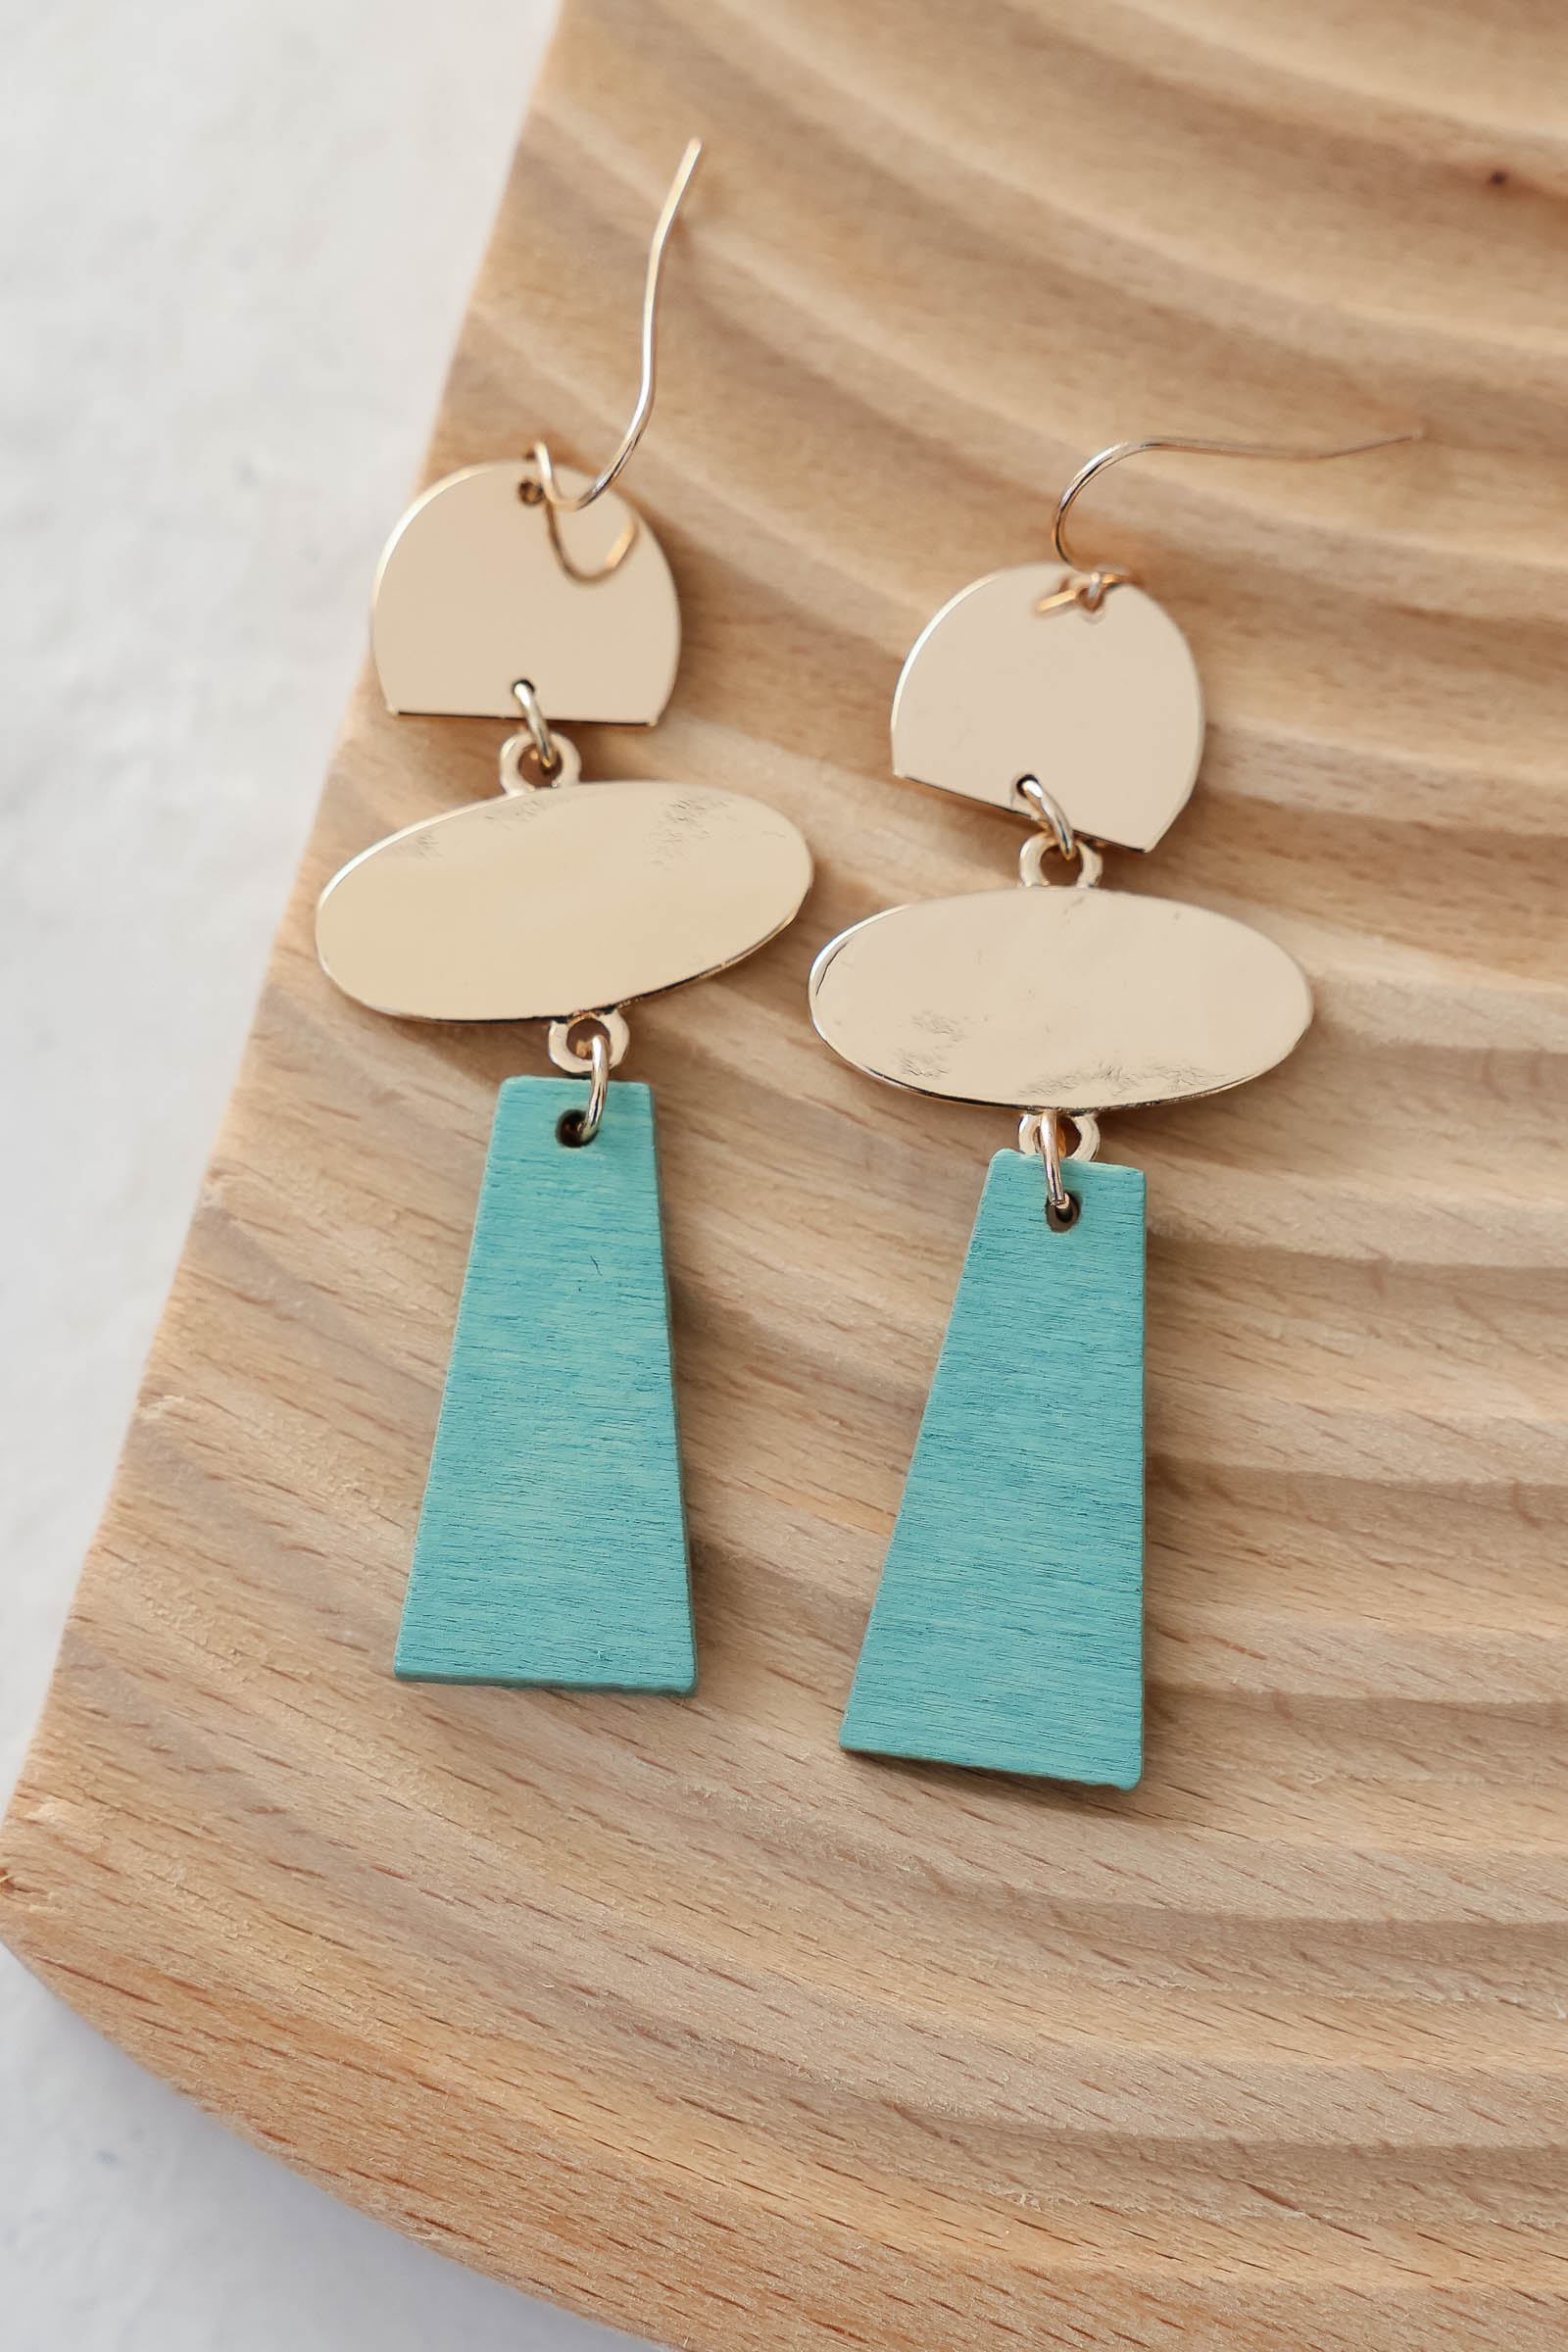 New Day Earrings - Turquoise, Closet Candy, 1